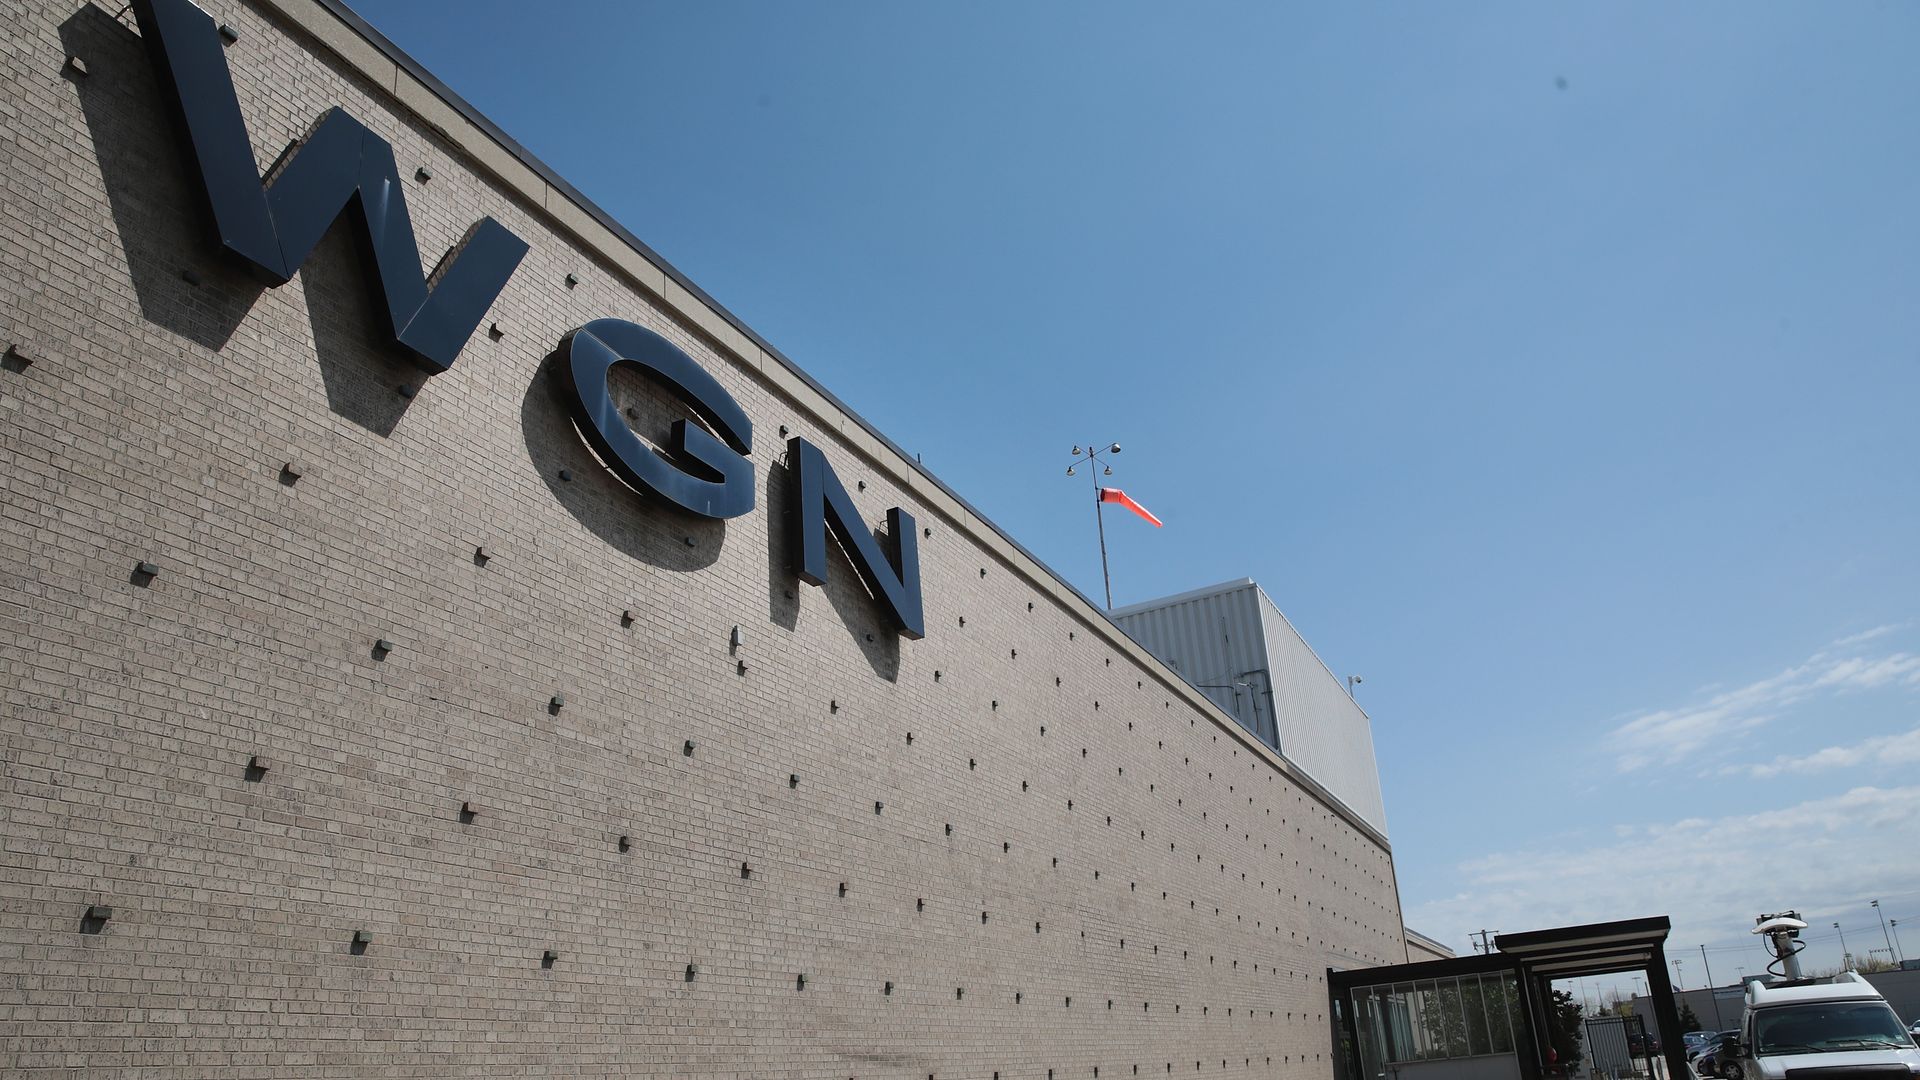 Signage for Chicago station WGN on the side of a building